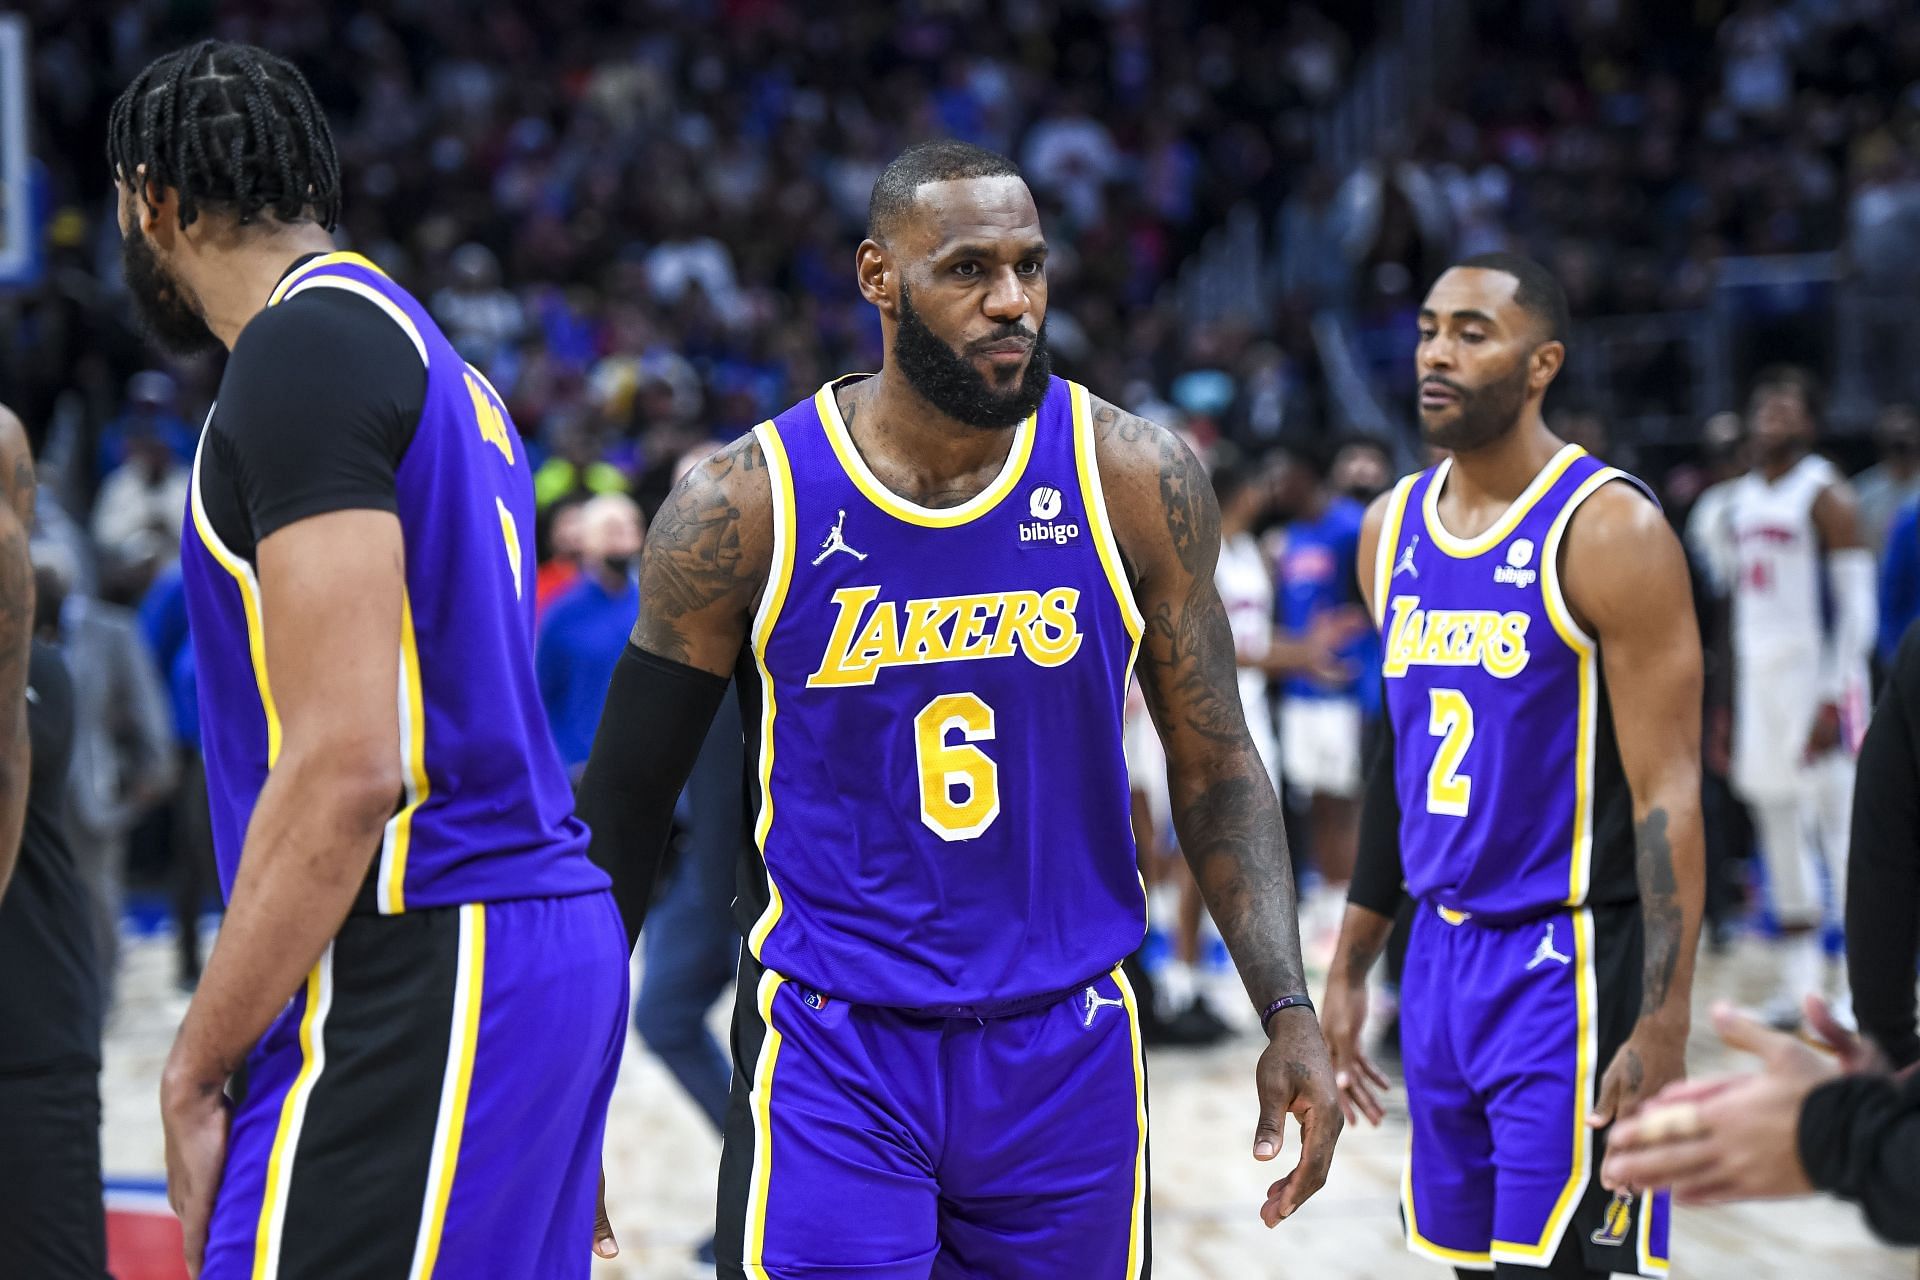 The LA Lakers are 13-13 for the 2021-22 season